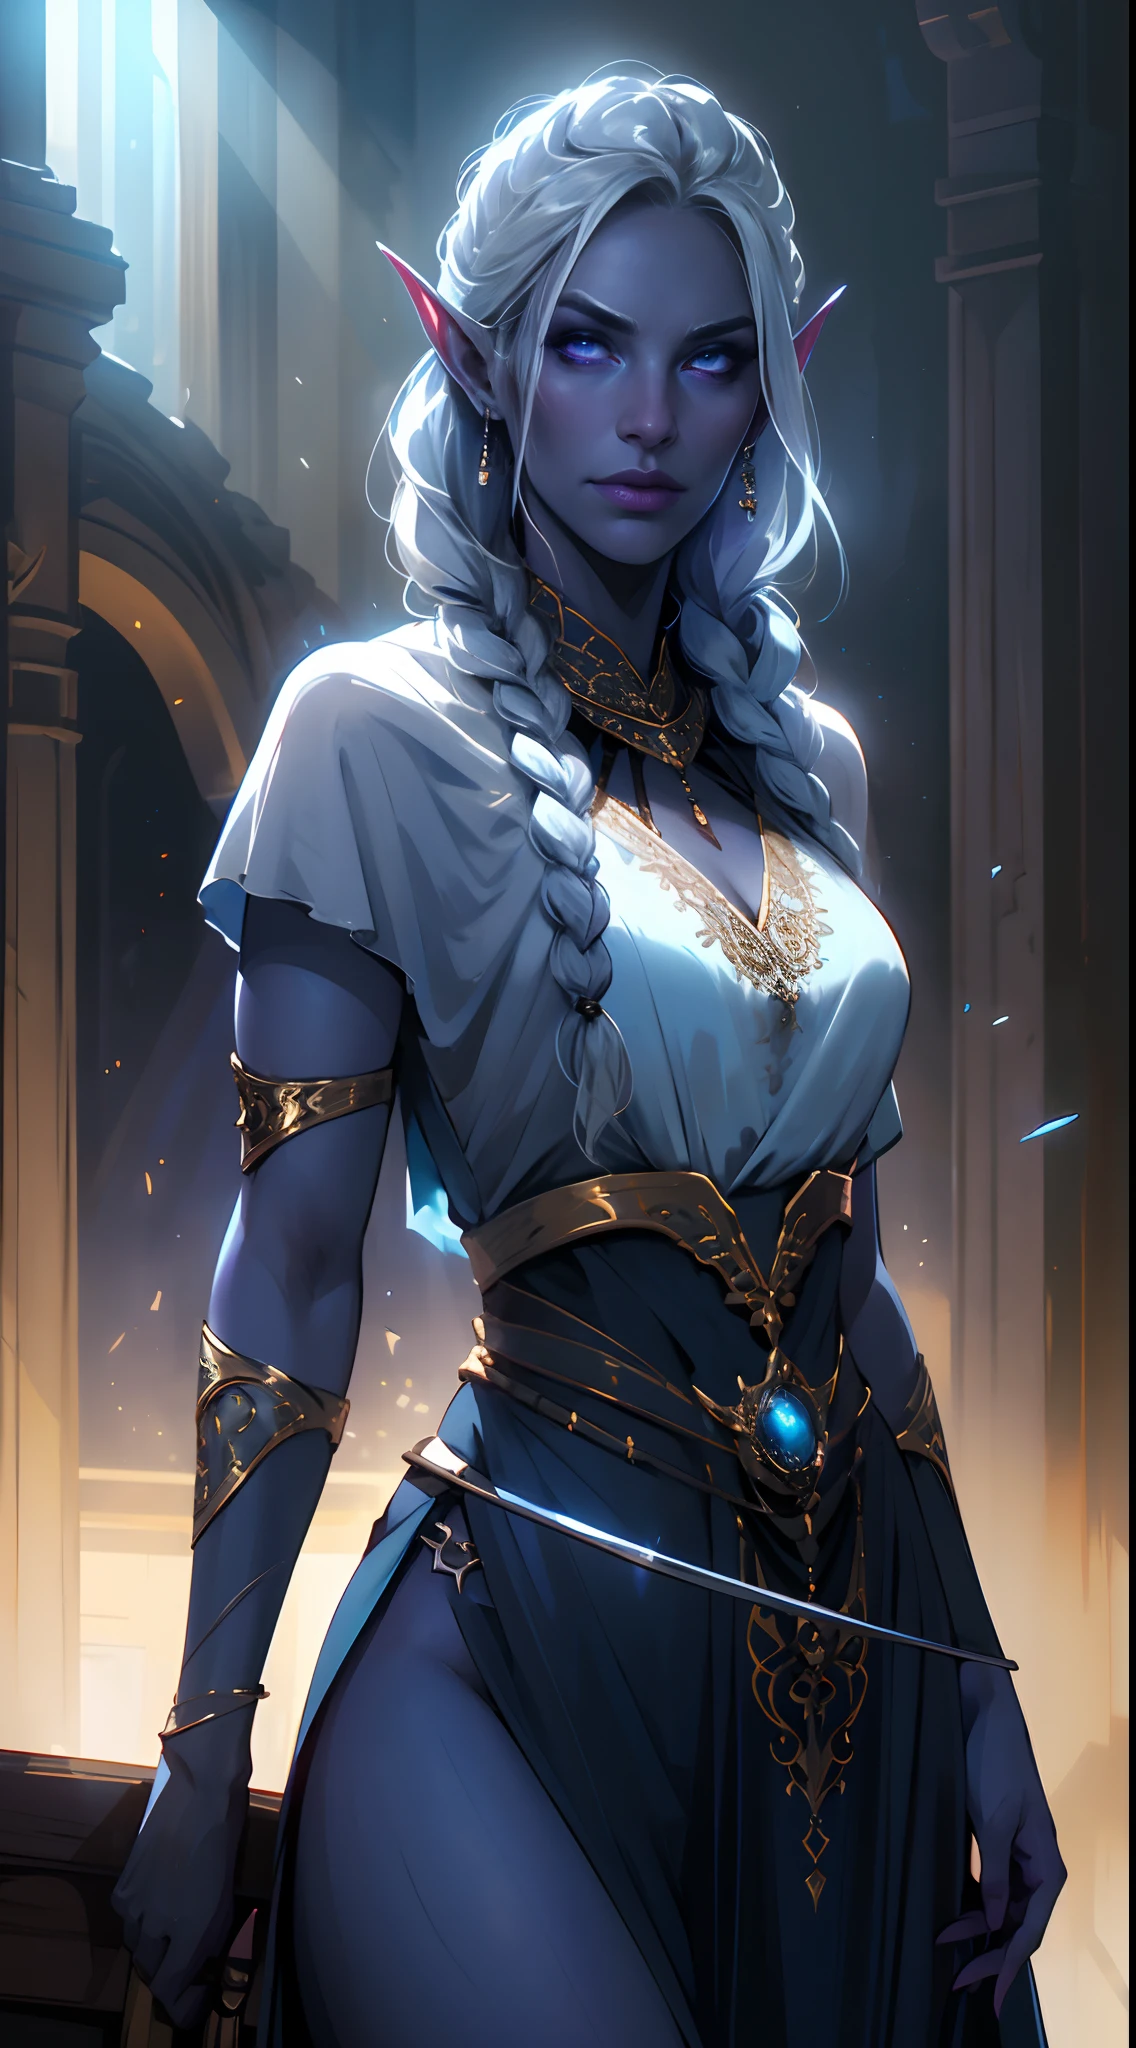 unreal engine:1.4, fotorrealist:1.4, skin texture:1.4, Masterpiece:1.4,1girl, drow sexy, purple-blue skin, Long, elaborate pale silver braids, ((Red eyes)), jewelry, Elf&#39;s ears, earrings, ((Sexy White Sorceress Dress)), ((Manage staff)), ((Cast light magic)), on a scythe roof, athletic, volumetric illumination, The best quality, Masterpiece, realist, anatomically correct, (Strong cinematic lighting), impressive details, intricate details, 8k post-production, High resolution, Super details, trends on Artstation, sharp focus, Depth of field F/1.8, studio photos, (((Looking at camera)))